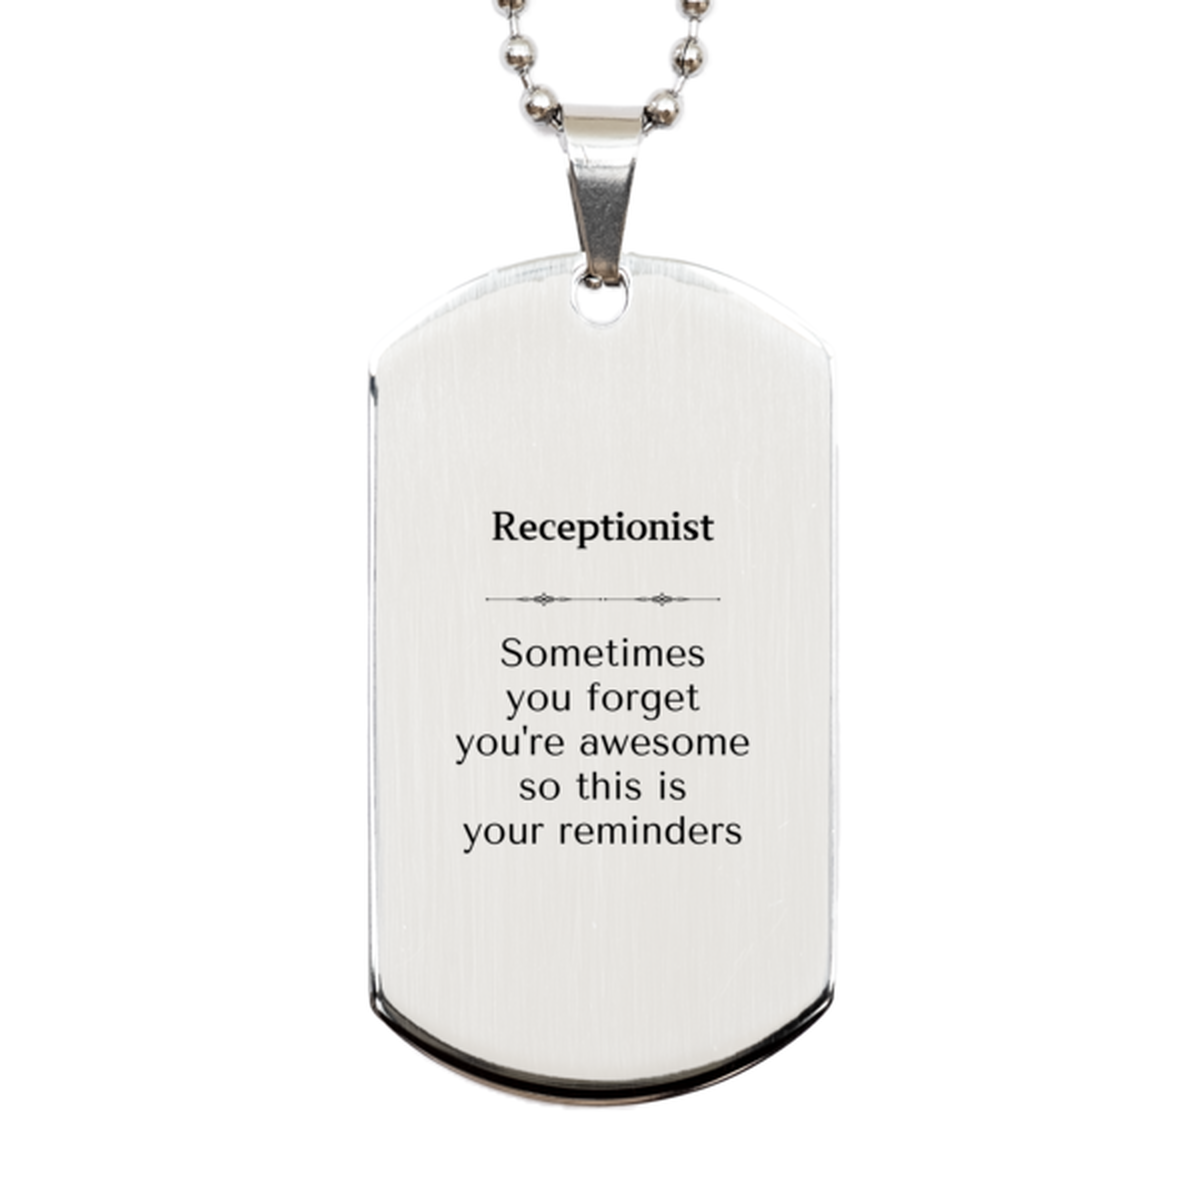 Sentimental Receptionist Silver Dog Tag, Receptionist Sometimes you forget you're awesome so this is your reminders, Graduation Christmas Birthday Gifts for Receptionist, Men, Women, Coworkers